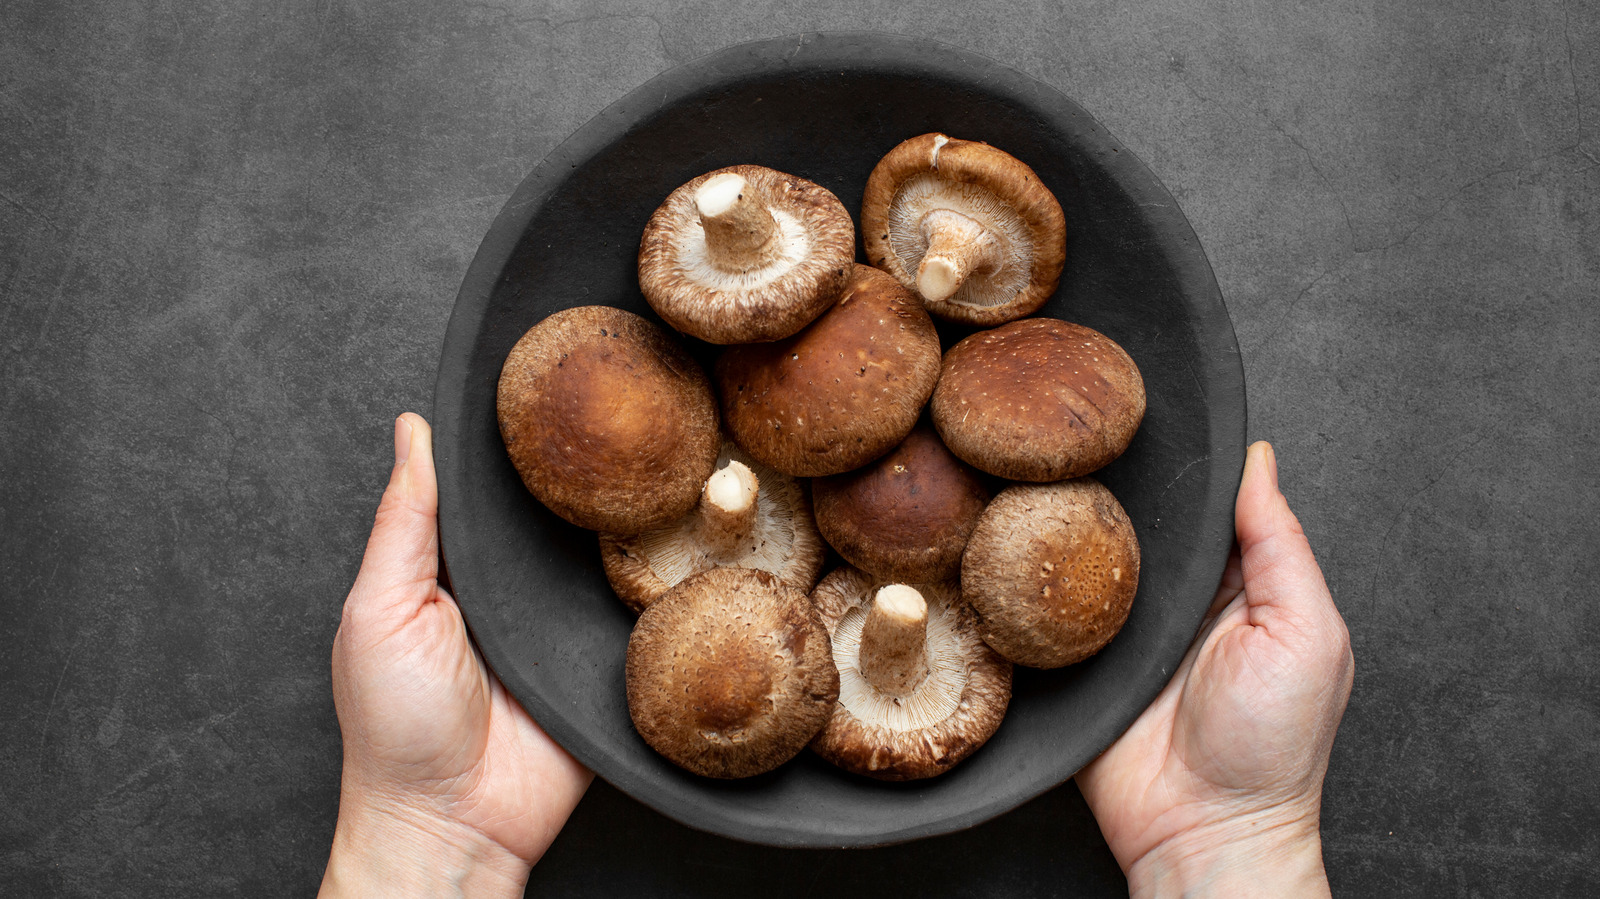 https://www.tastingtable.com/img/gallery/everything-you-need-to-know-about-shiitake-mushrooms/l-intro-1675112603.jpg